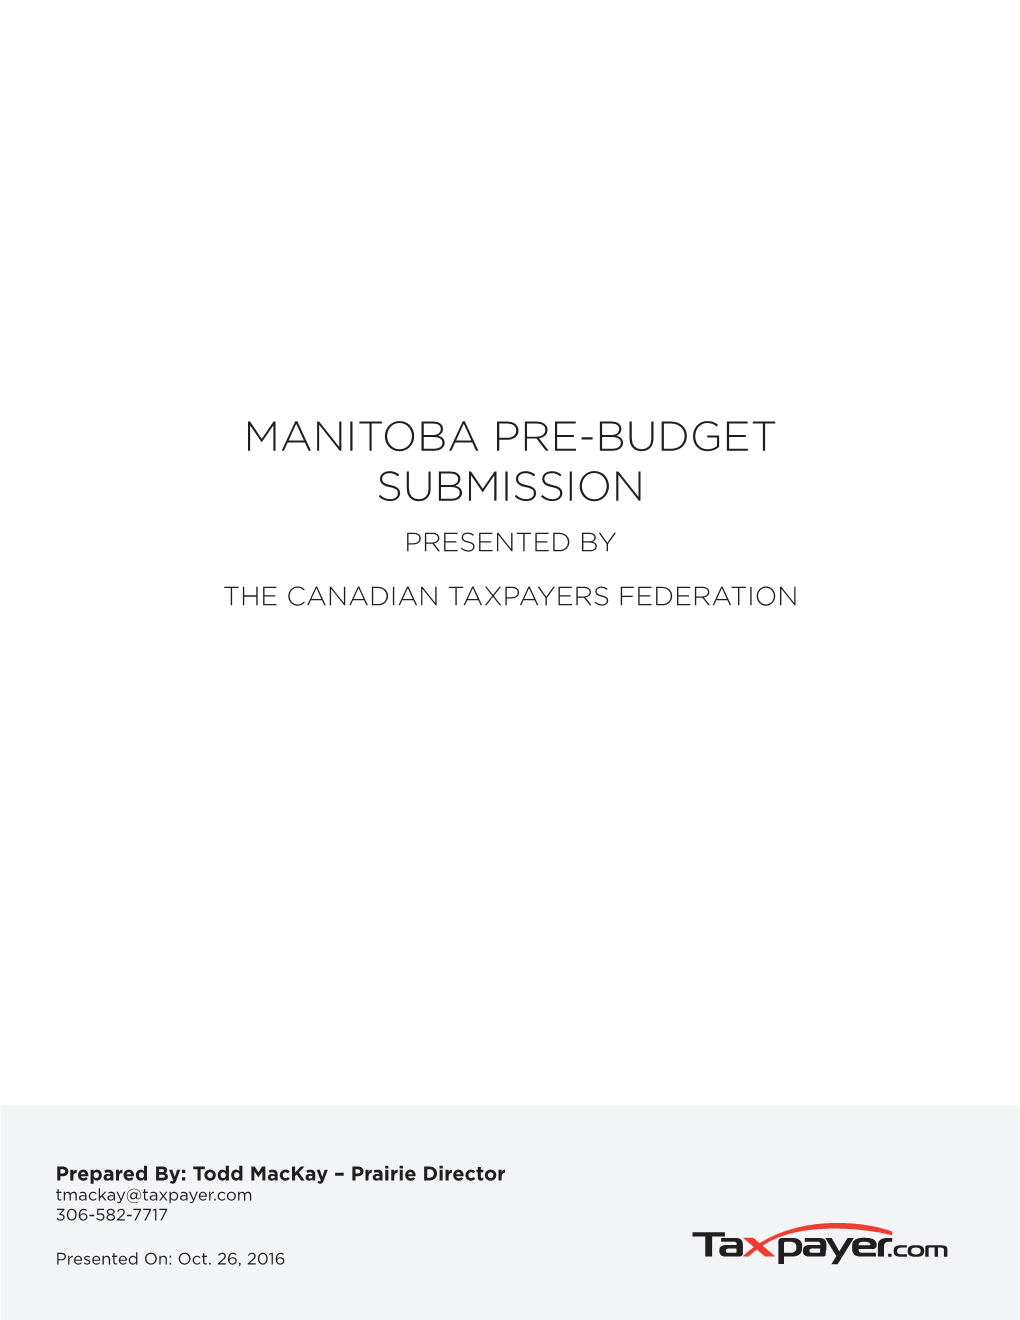 Manitoba Pre-Budget Submission Presented By